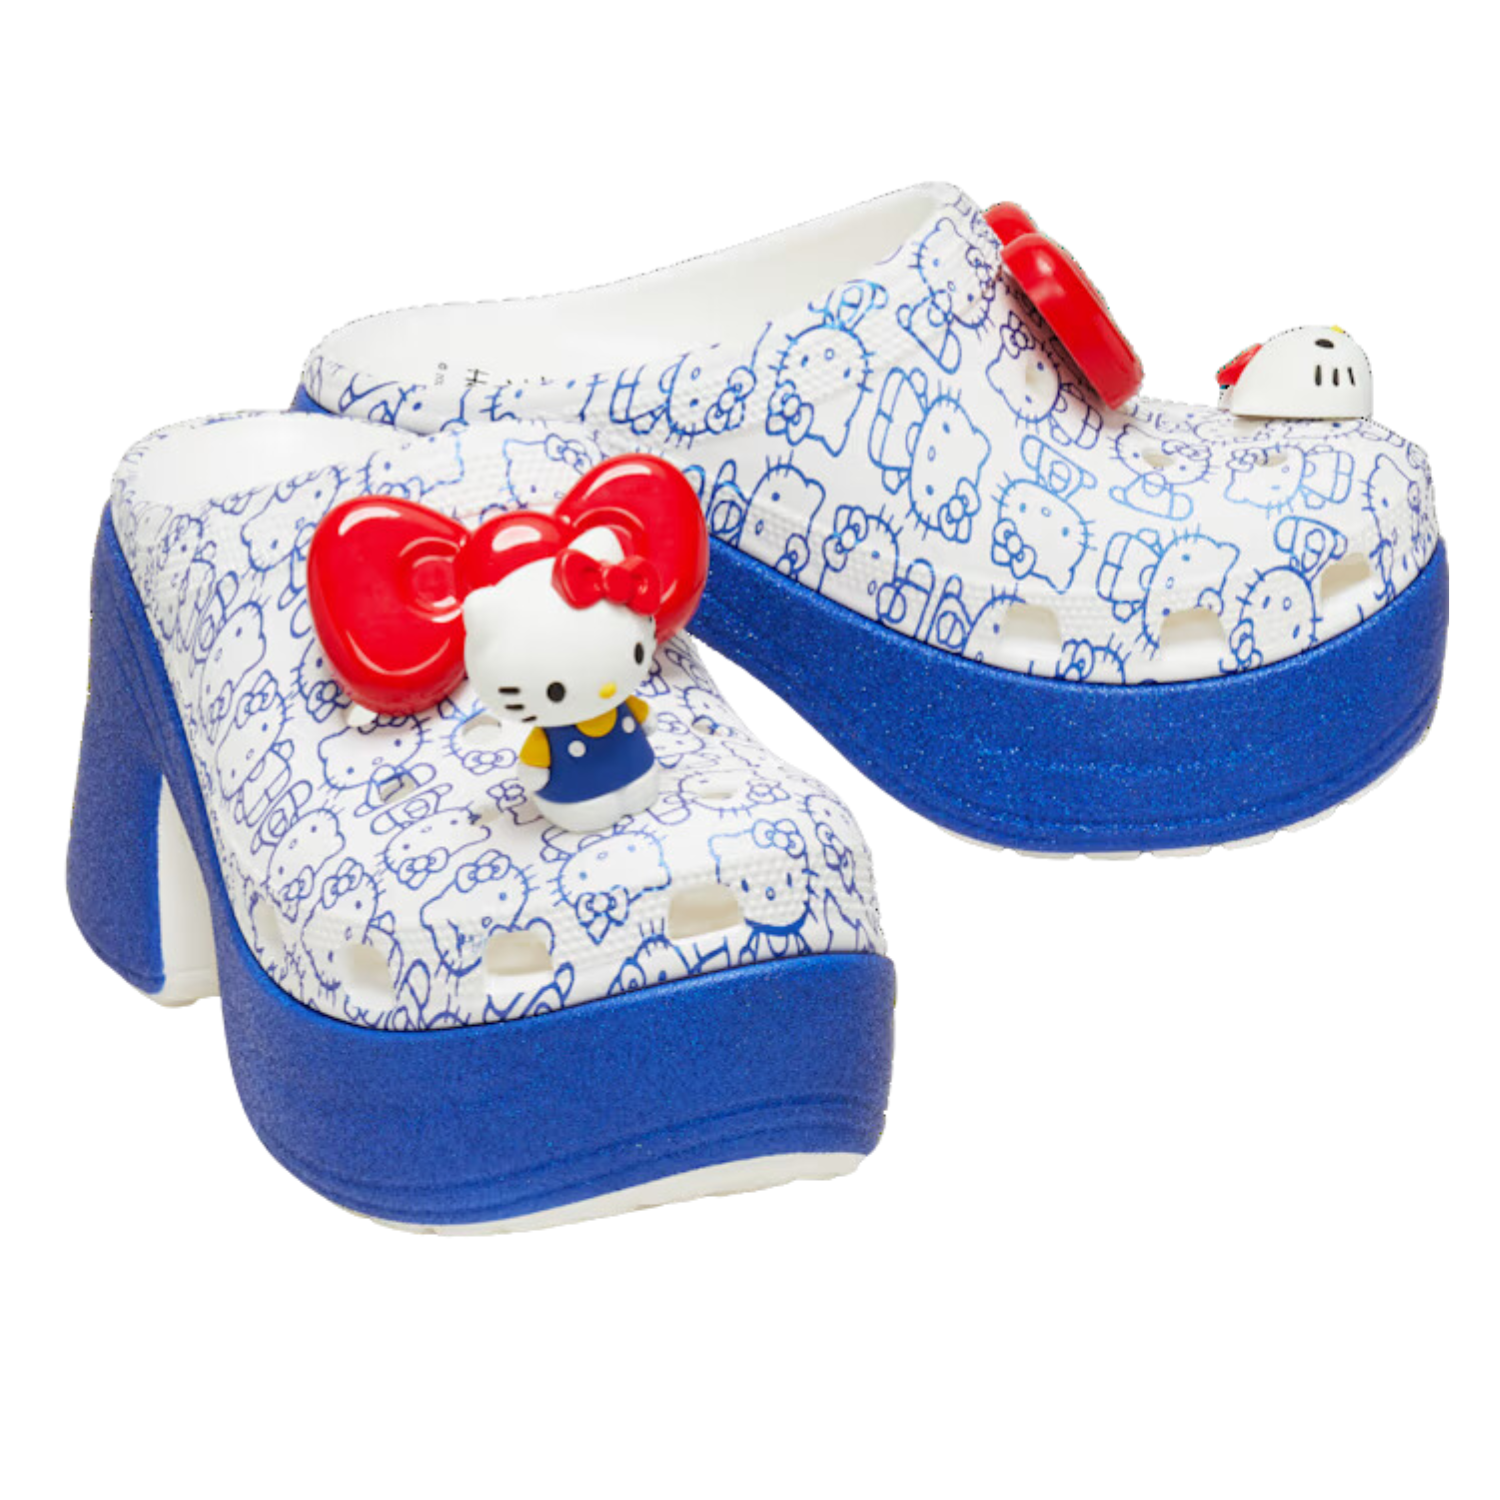 This image shows a pair of white clogs with the Hello Kitty figure printed on it with cat and bow charms on the top with a heel and blue sole